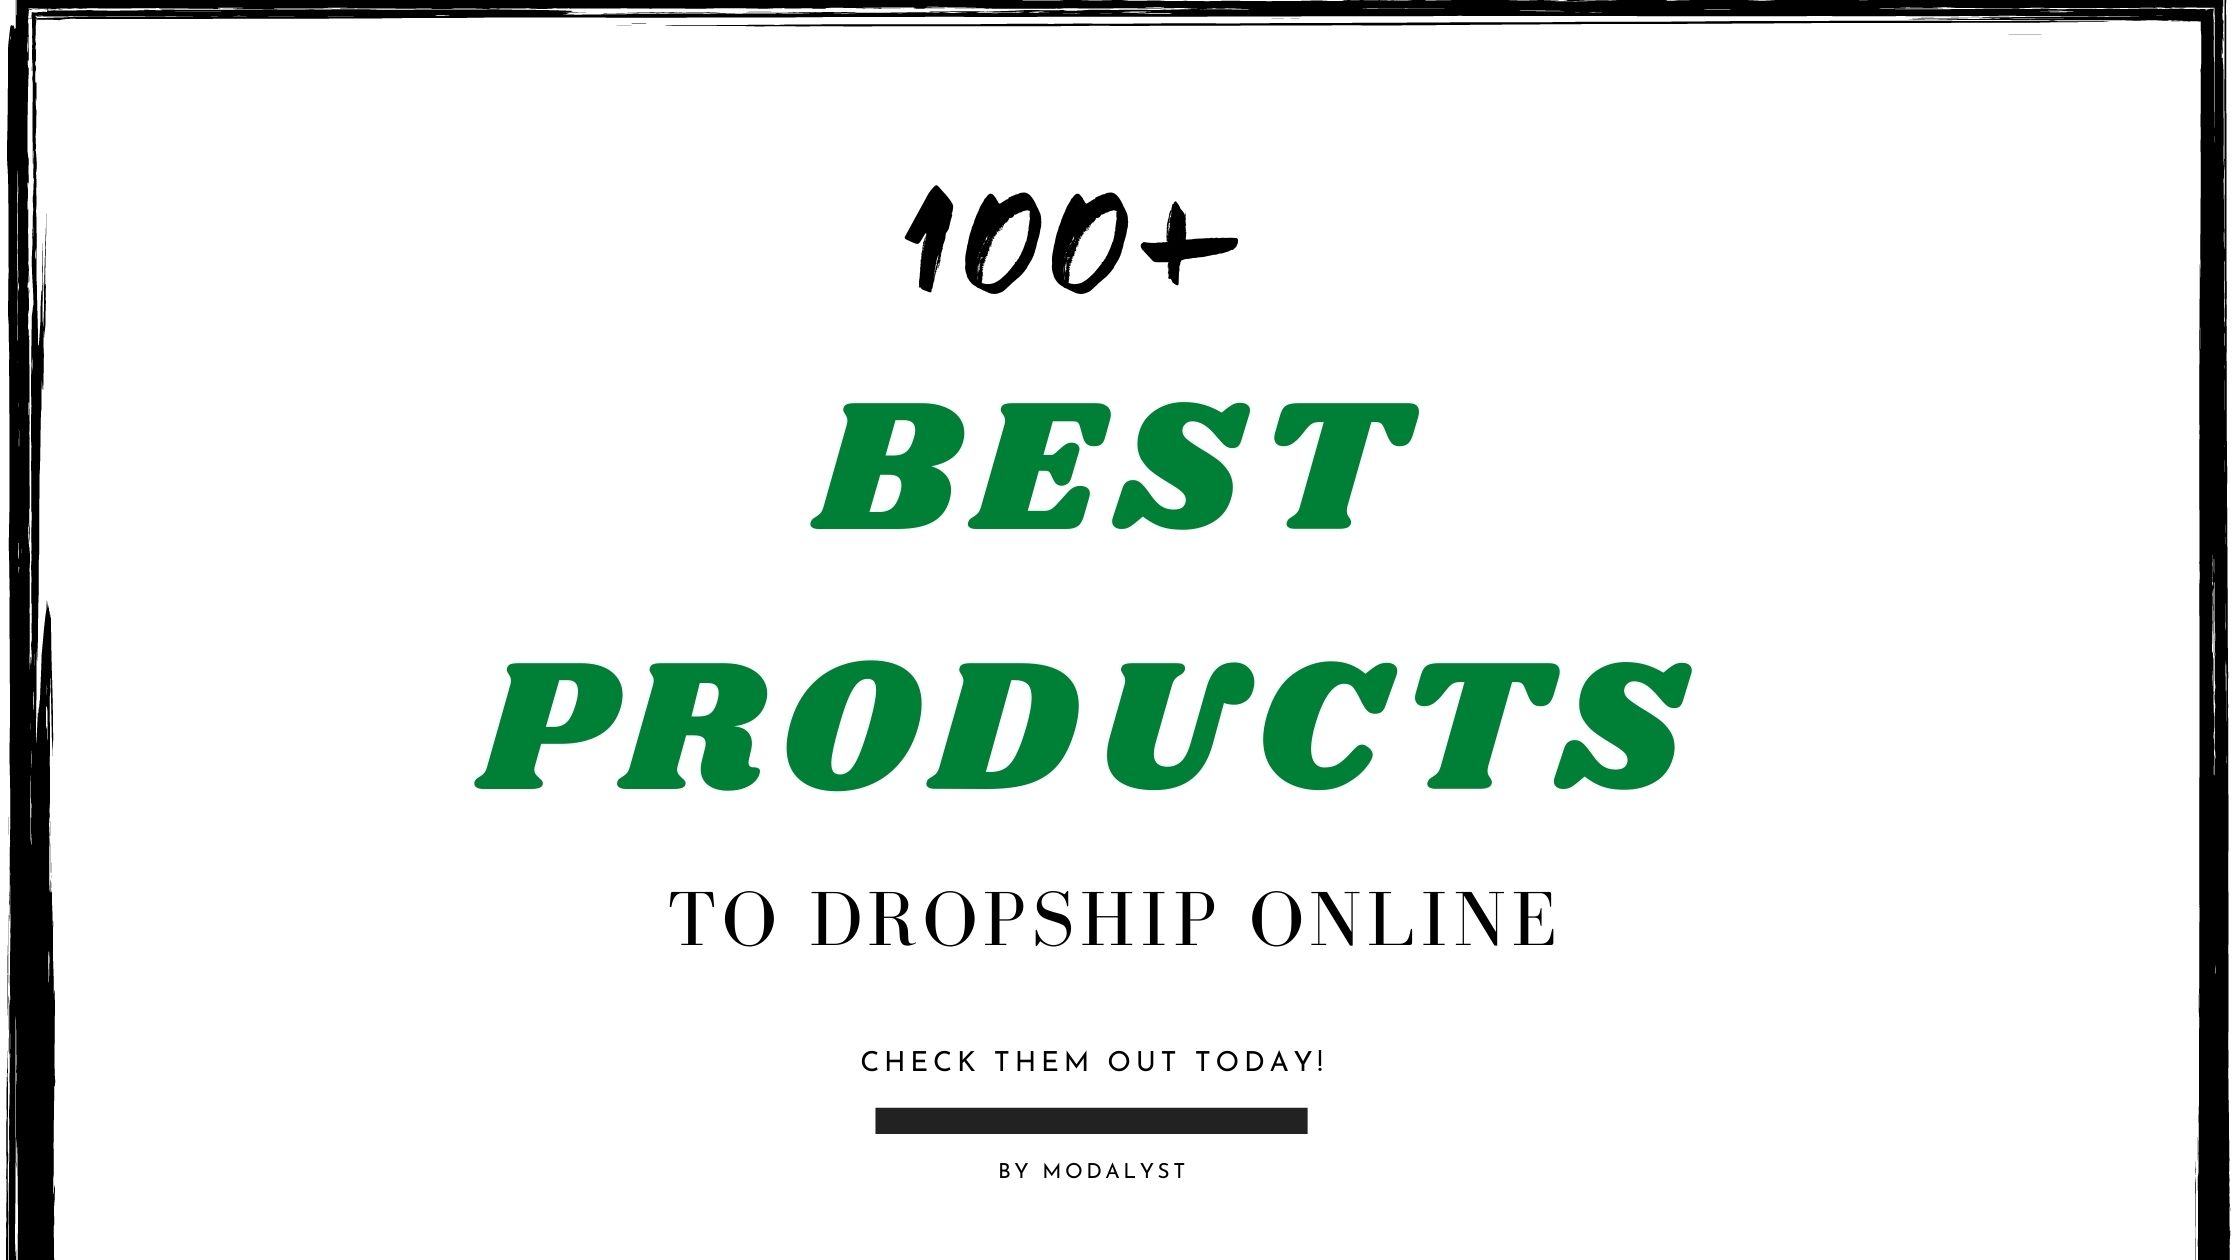 100 Dropshipping Business Ideas for 2022